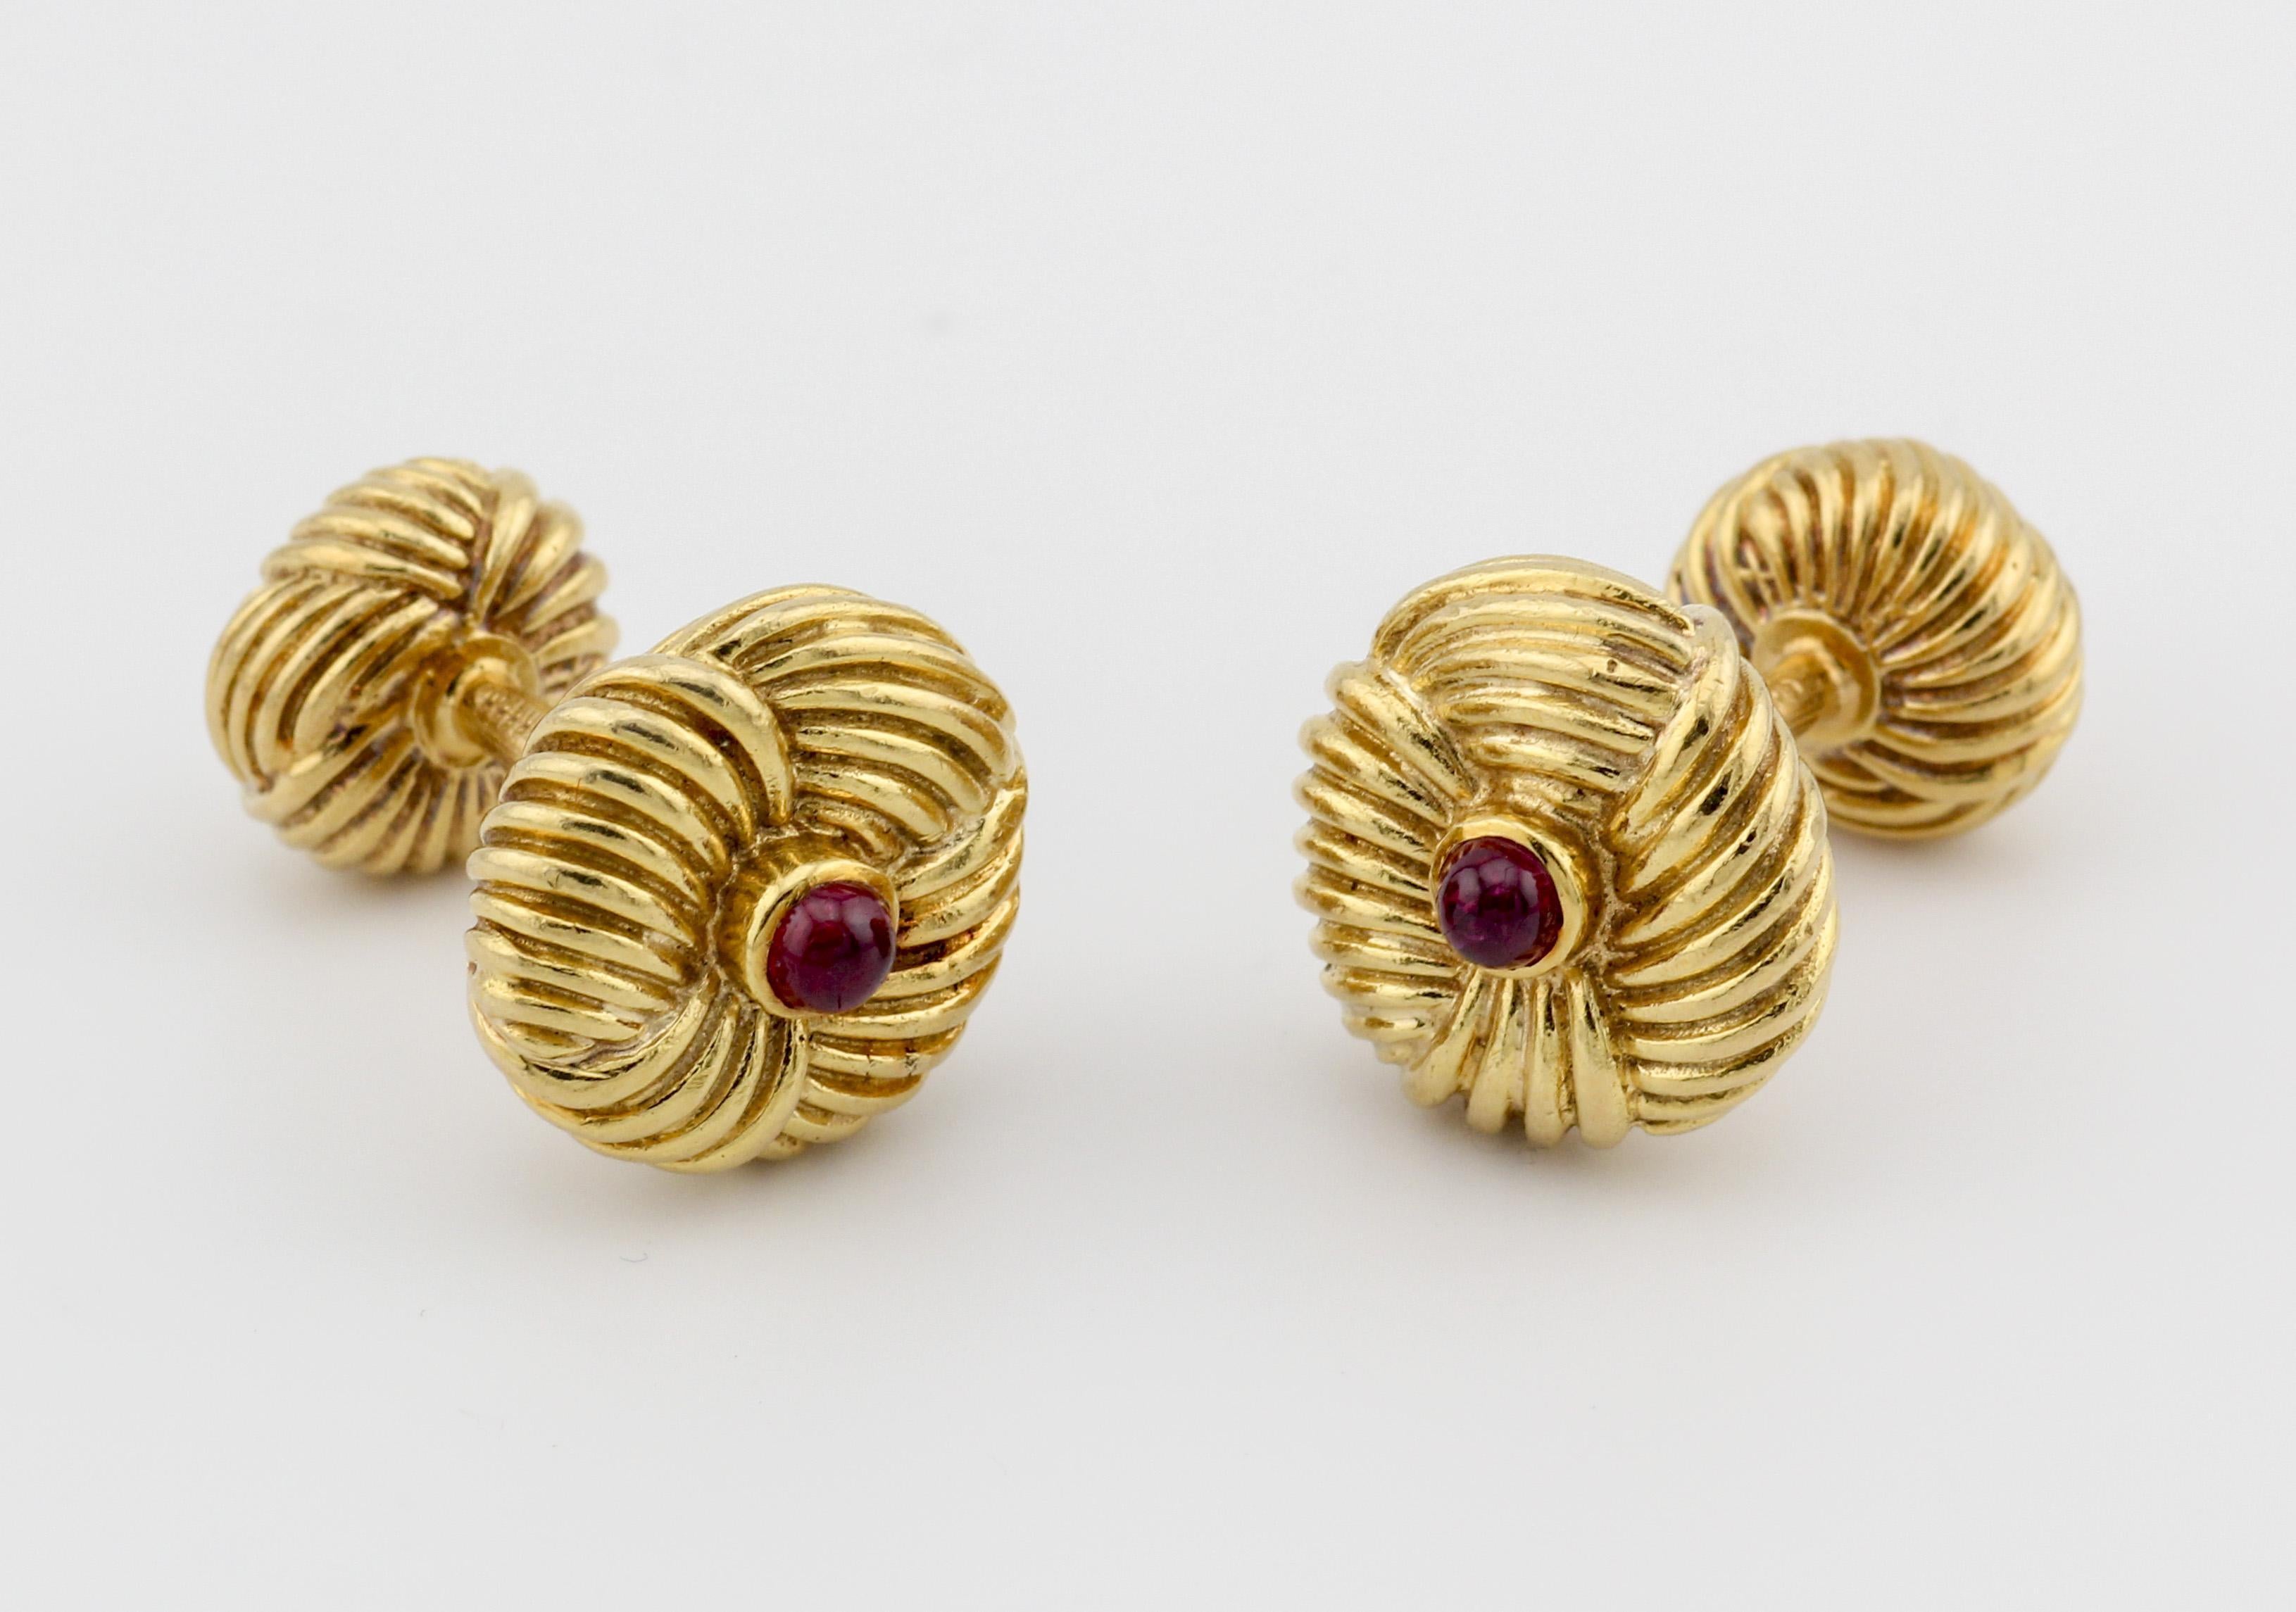 Step back in time to the glamorous 1970s with the Tiffany & Co. Schlumberger Vintage Ruby 18k Yellow Gold Cufflinks, a true embodiment of opulence and enduring style. Crafted by the legendary designer Jean Schlumberger for Tiffany & Co., these